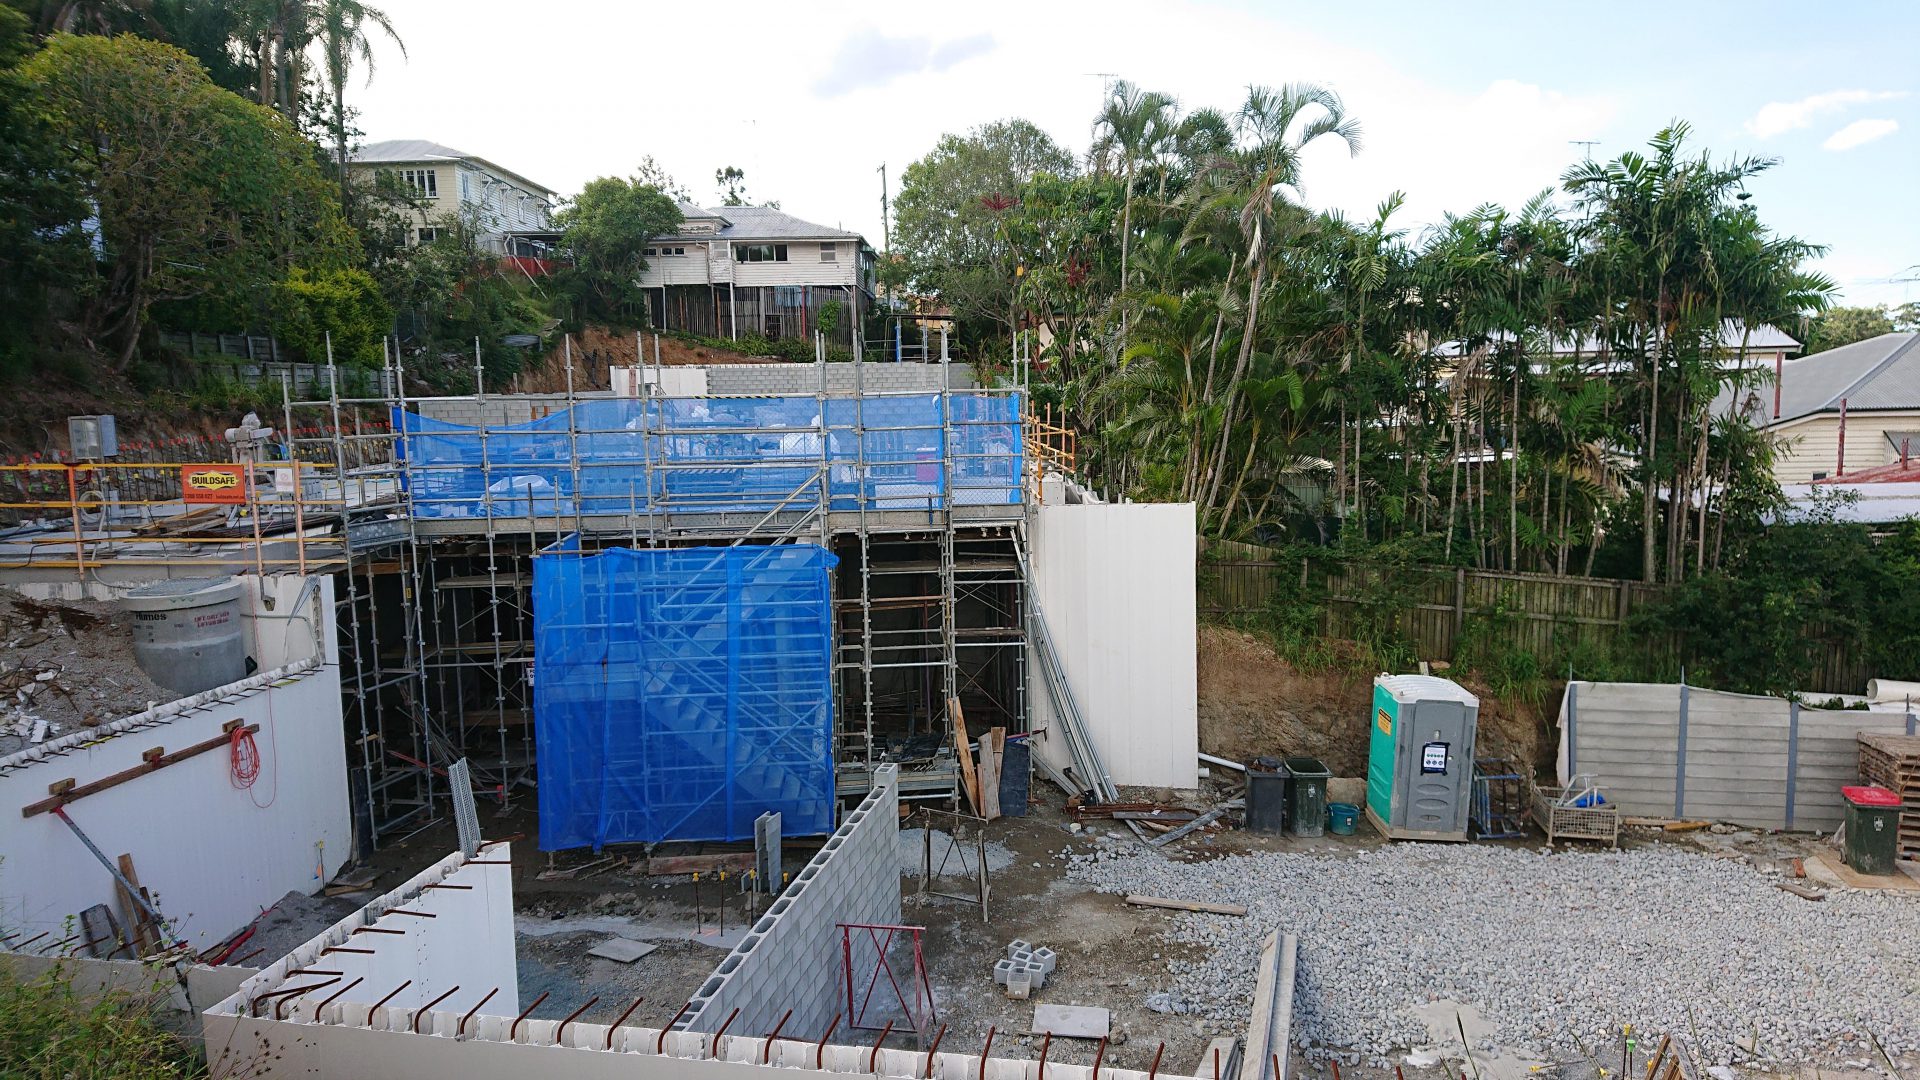 Ciel Residences Construction Update April 2020 (image supplied by the developer)